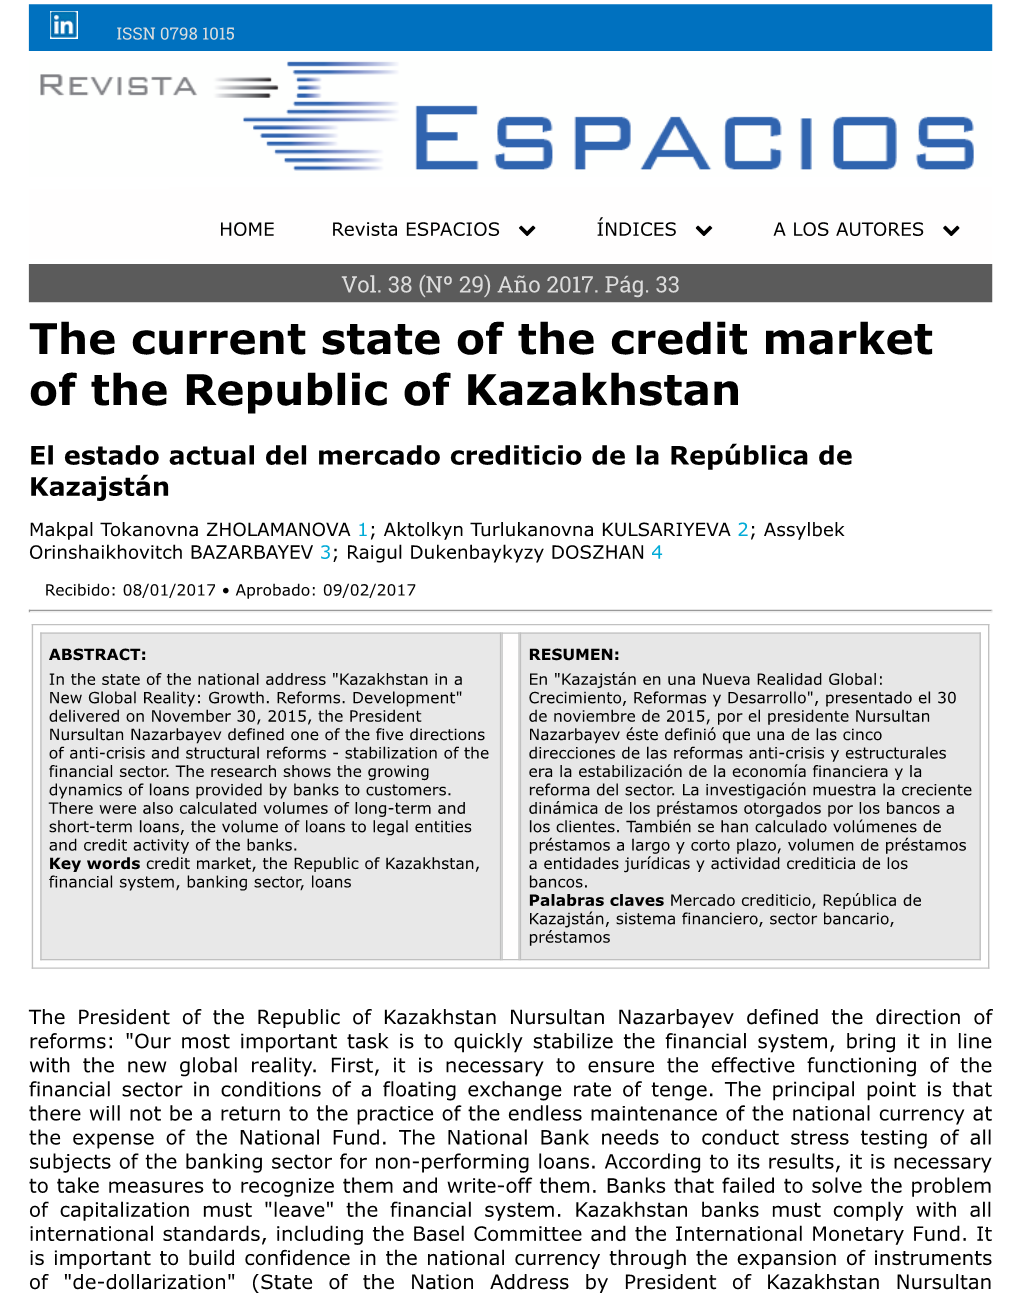 The Current State of the Credit Market of the Republic of Kazakhstan